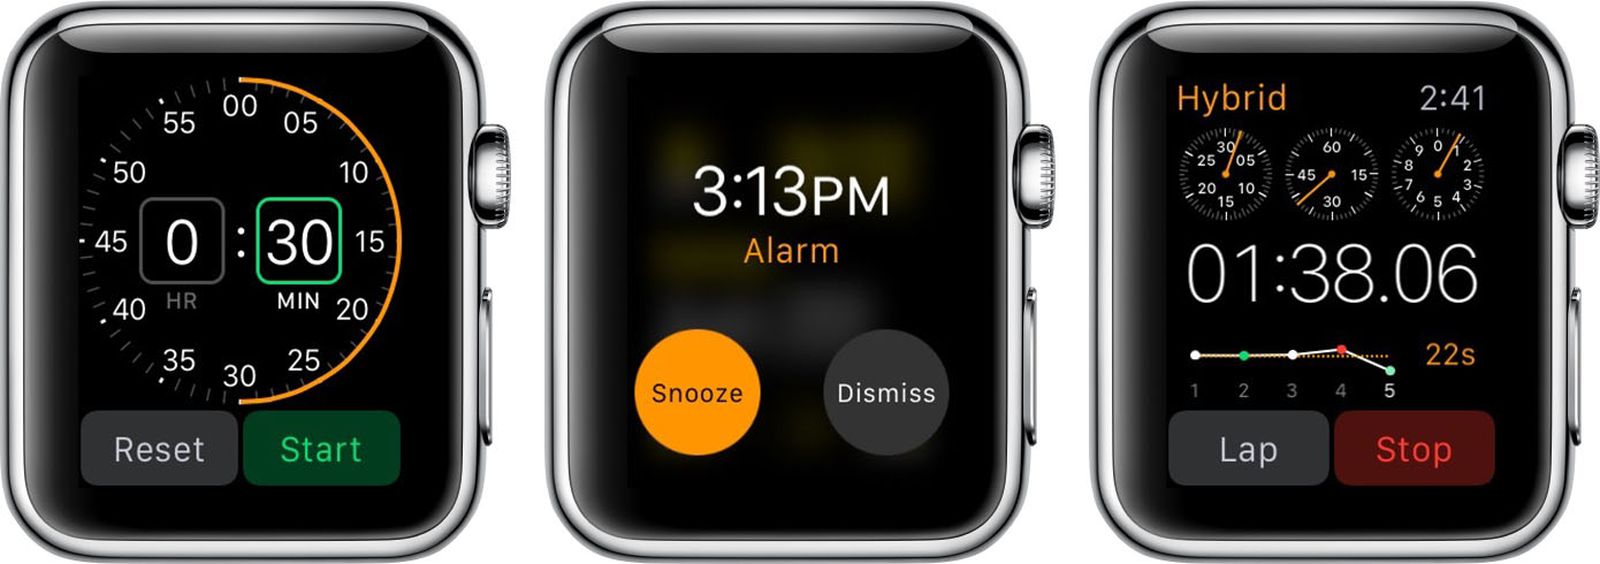 Korst Toevlucht scannen Using the Timer, Alarm, and Stopwatch Apps on Apple Watch - MacRumors